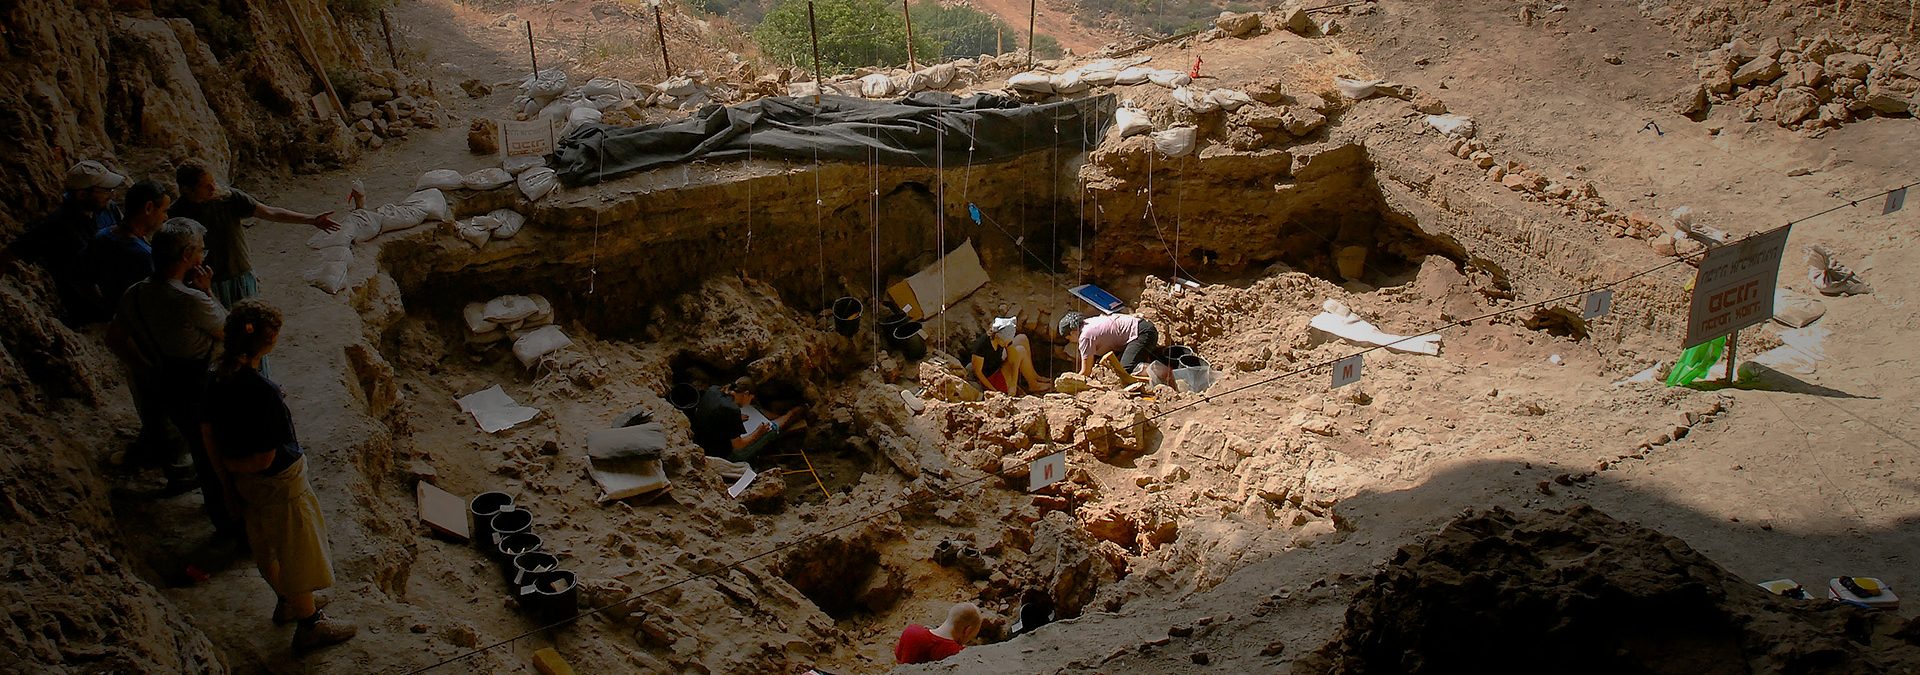 Archaeological dig site at Hilazon Tachtit Cave, Israel.